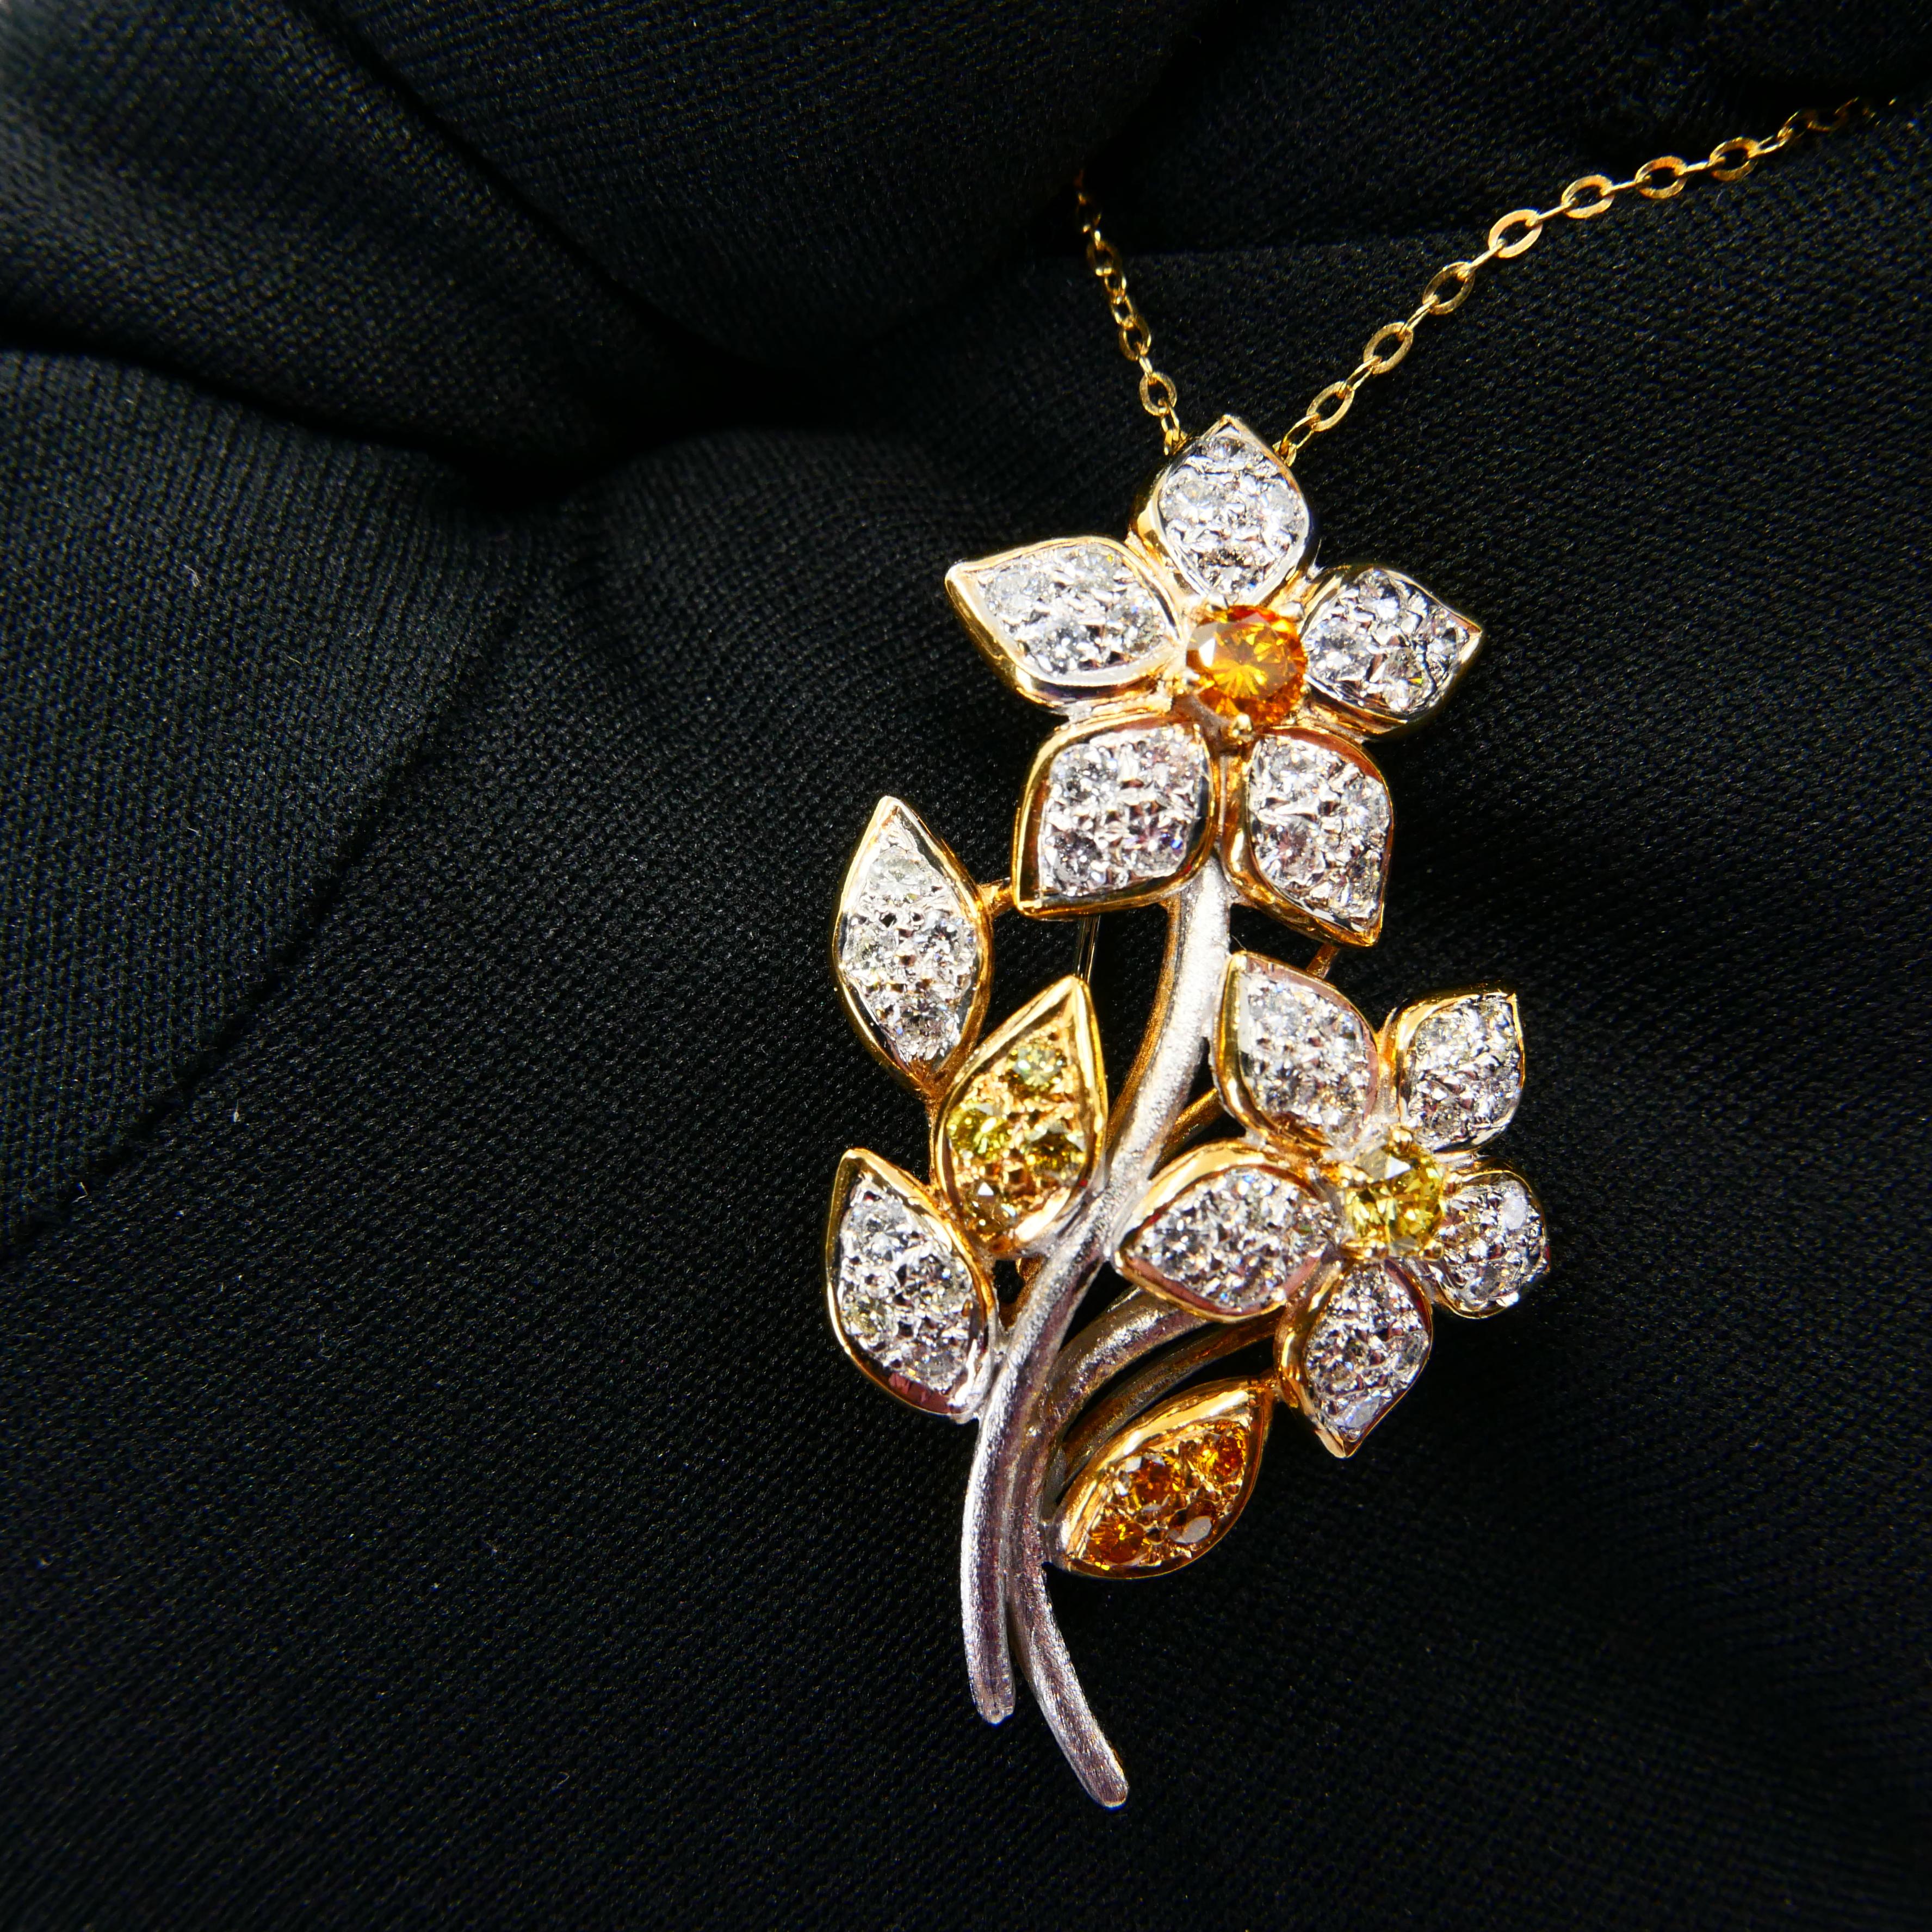 18K Gold, White and Fancy Yellow Color Diamond Flower Brooch Pendant, Two Use For Sale 1